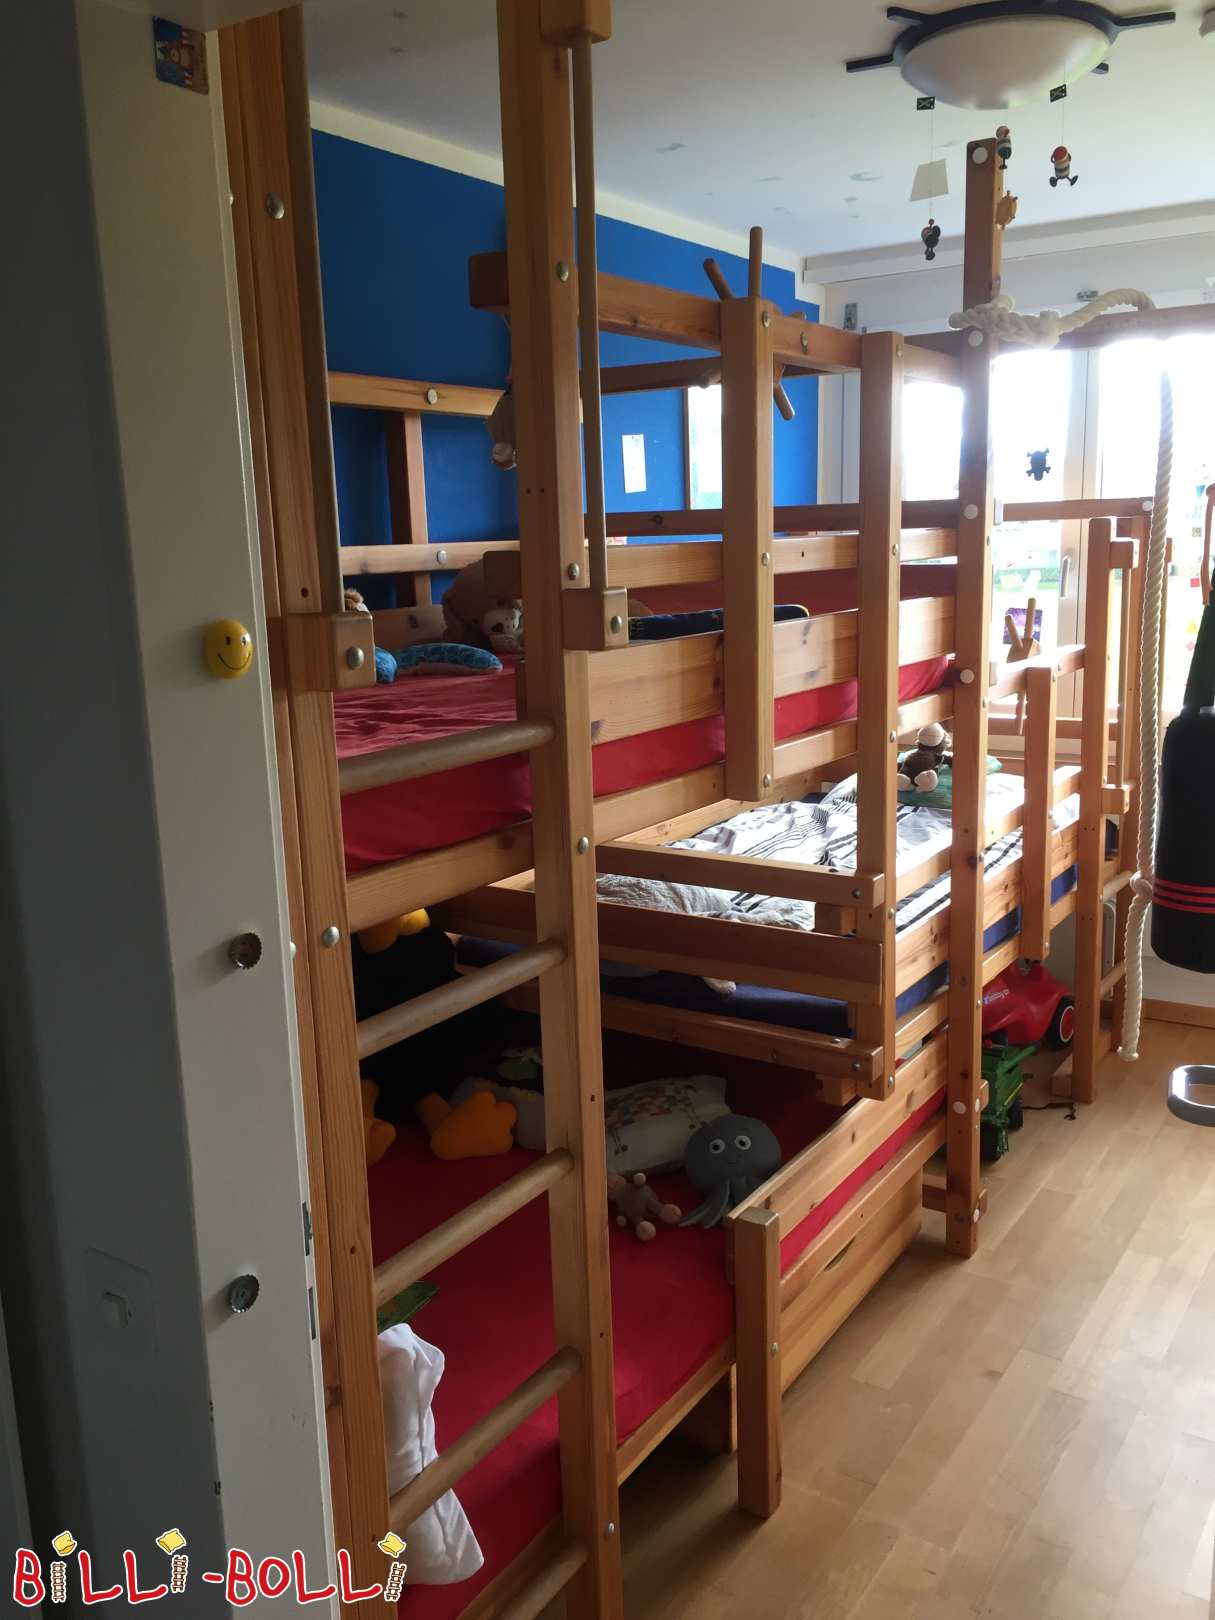 Both-top bed 2C 3/4 variant or triple bunk bed, oiled pine (Category: Both-Up Bunk Beds pre-owned)